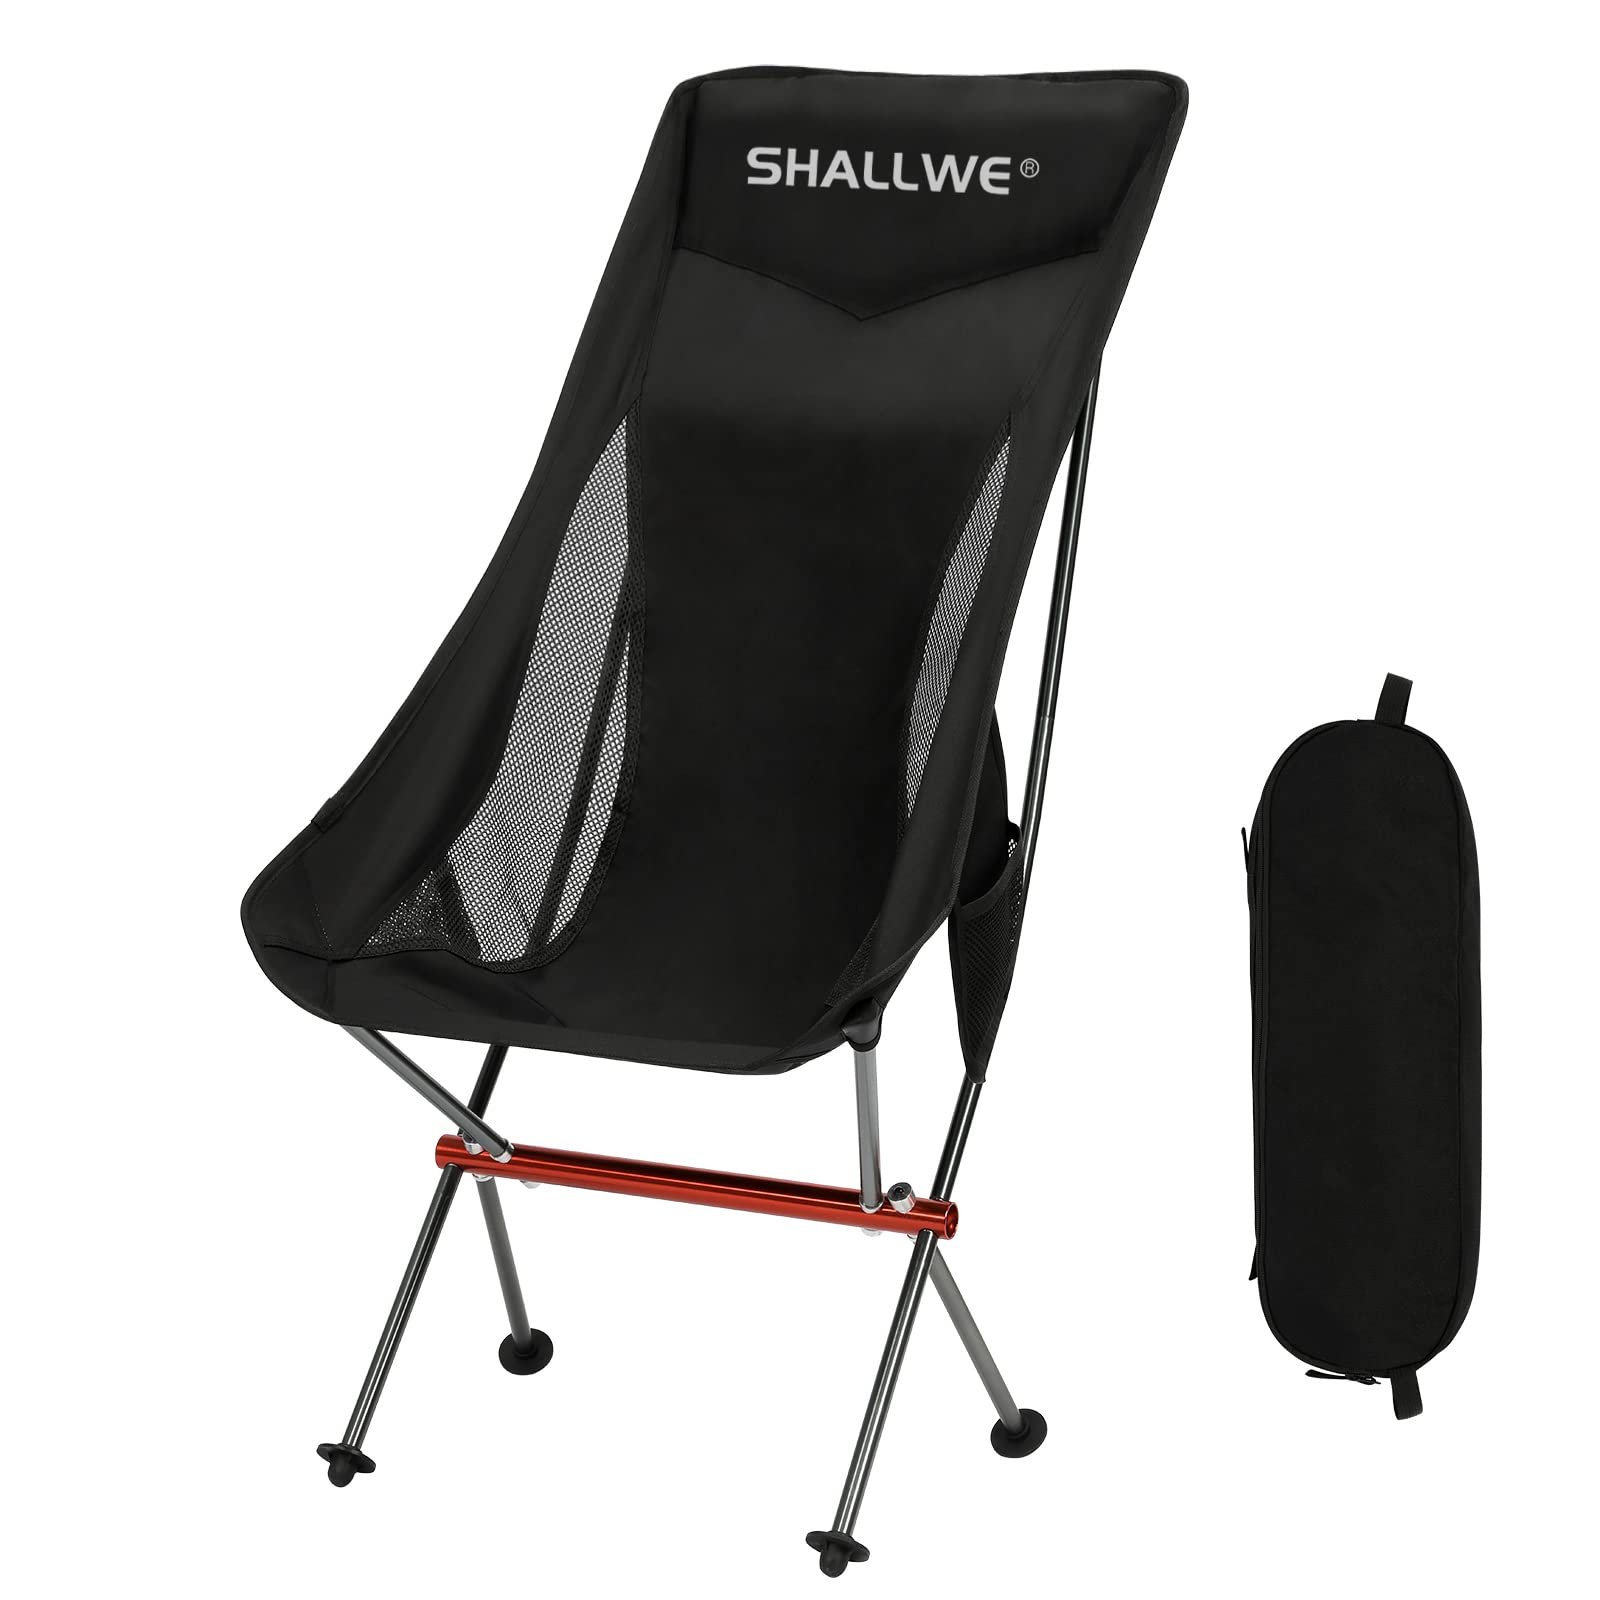 SHALLWE Ultralight High Back Folding Camping Chair Upgraded All Aluminum Structure Built-in Pillow Side Pocket Carry Bag